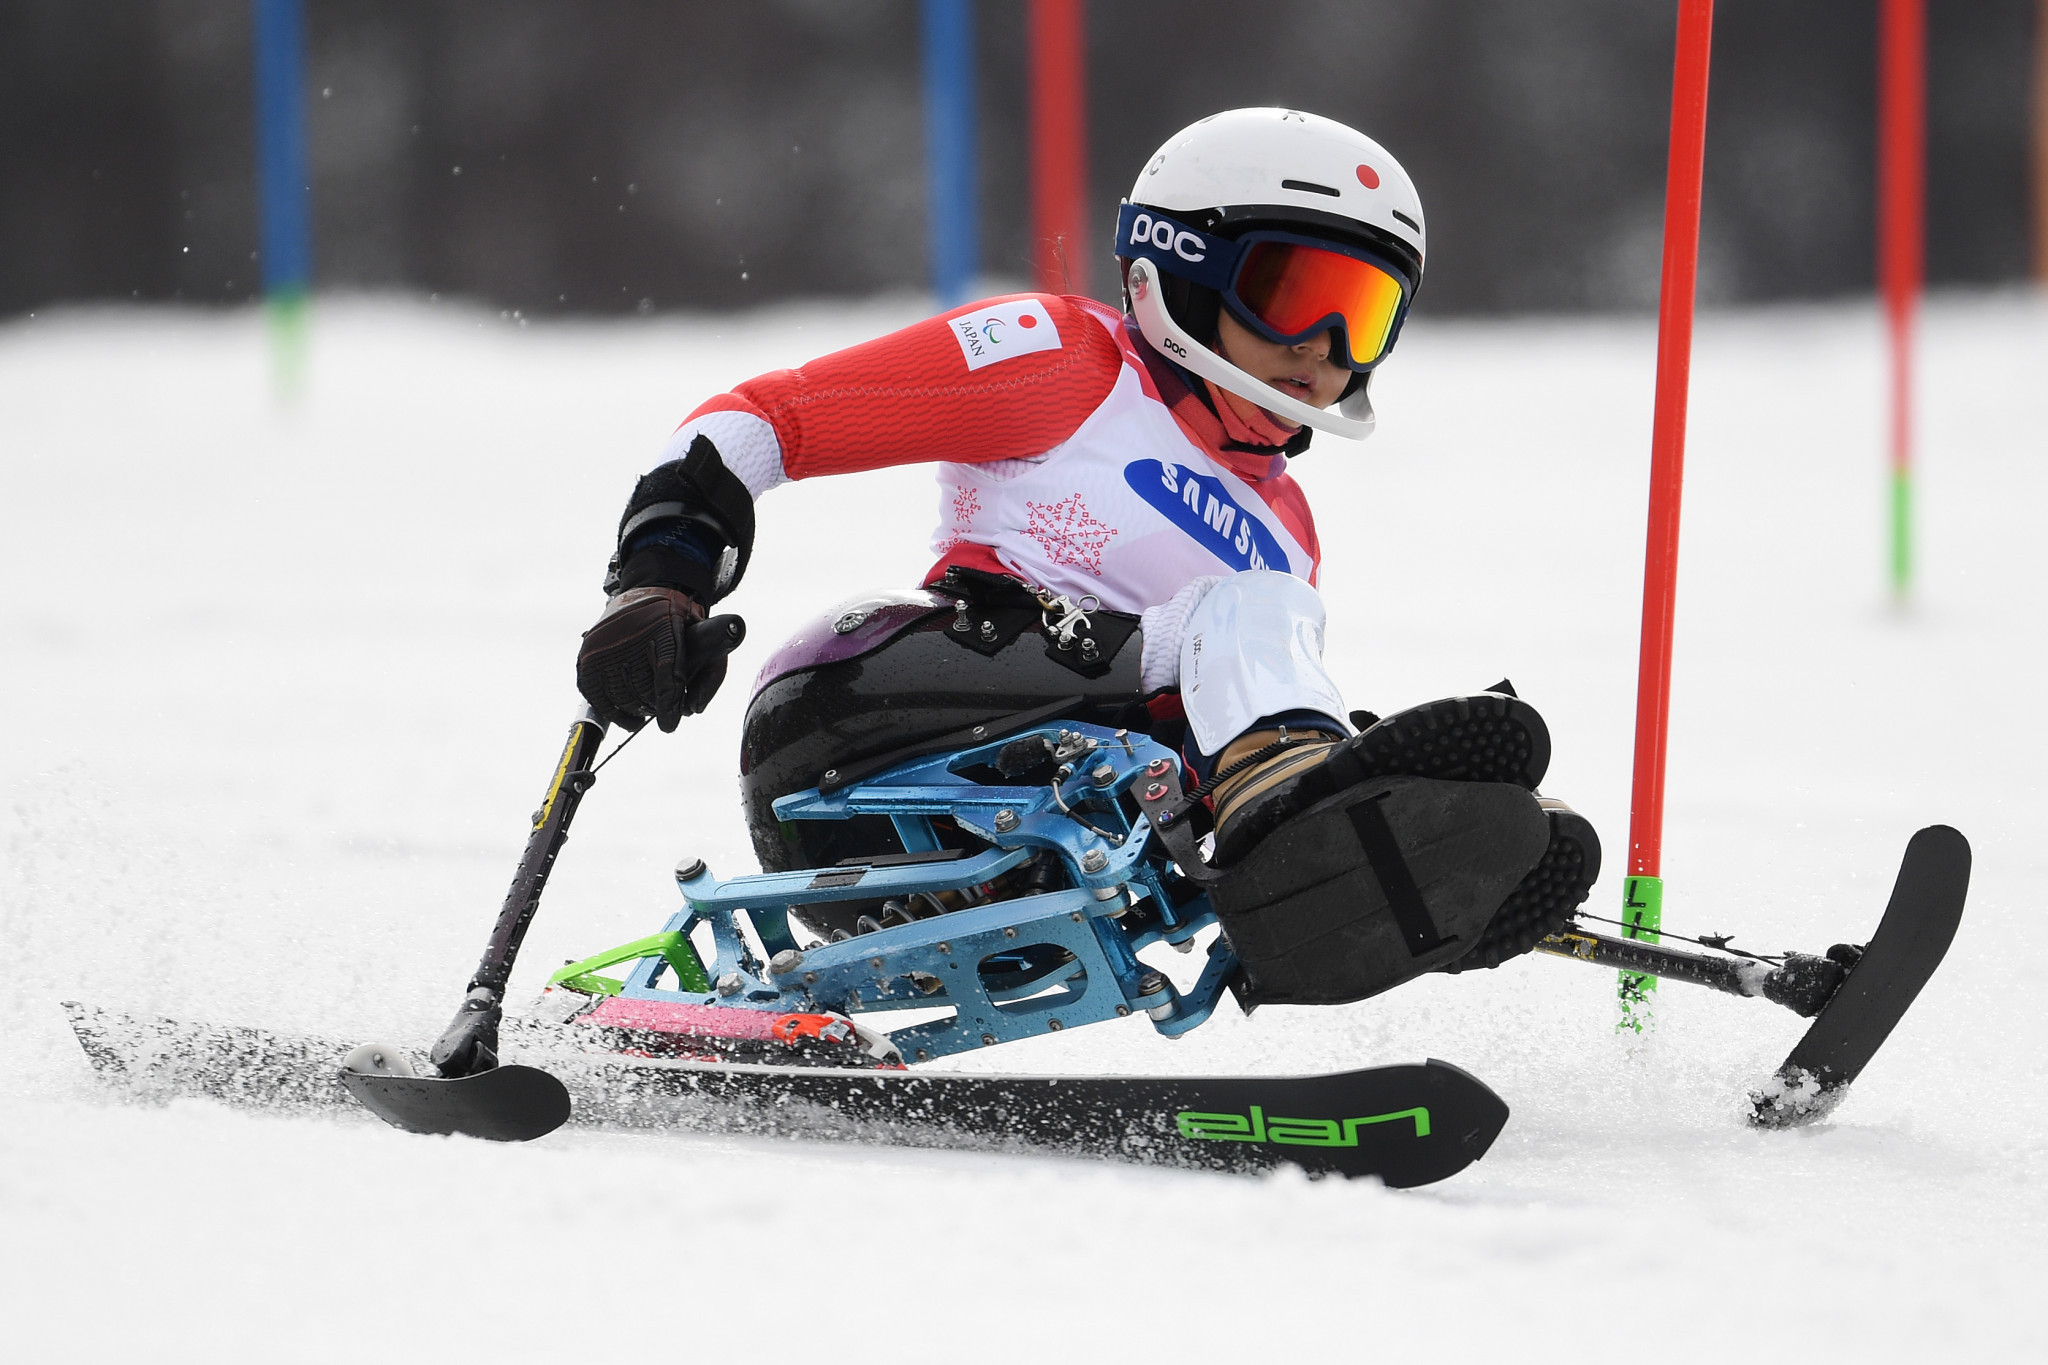 Paralympic champion Momoka Muraoka of Japan won the sitting event as the women’s giant slalom races took centre stage today at the World Para Alpine Skiing Championships in Kranjska Gora in Slovenia ©Getty Images